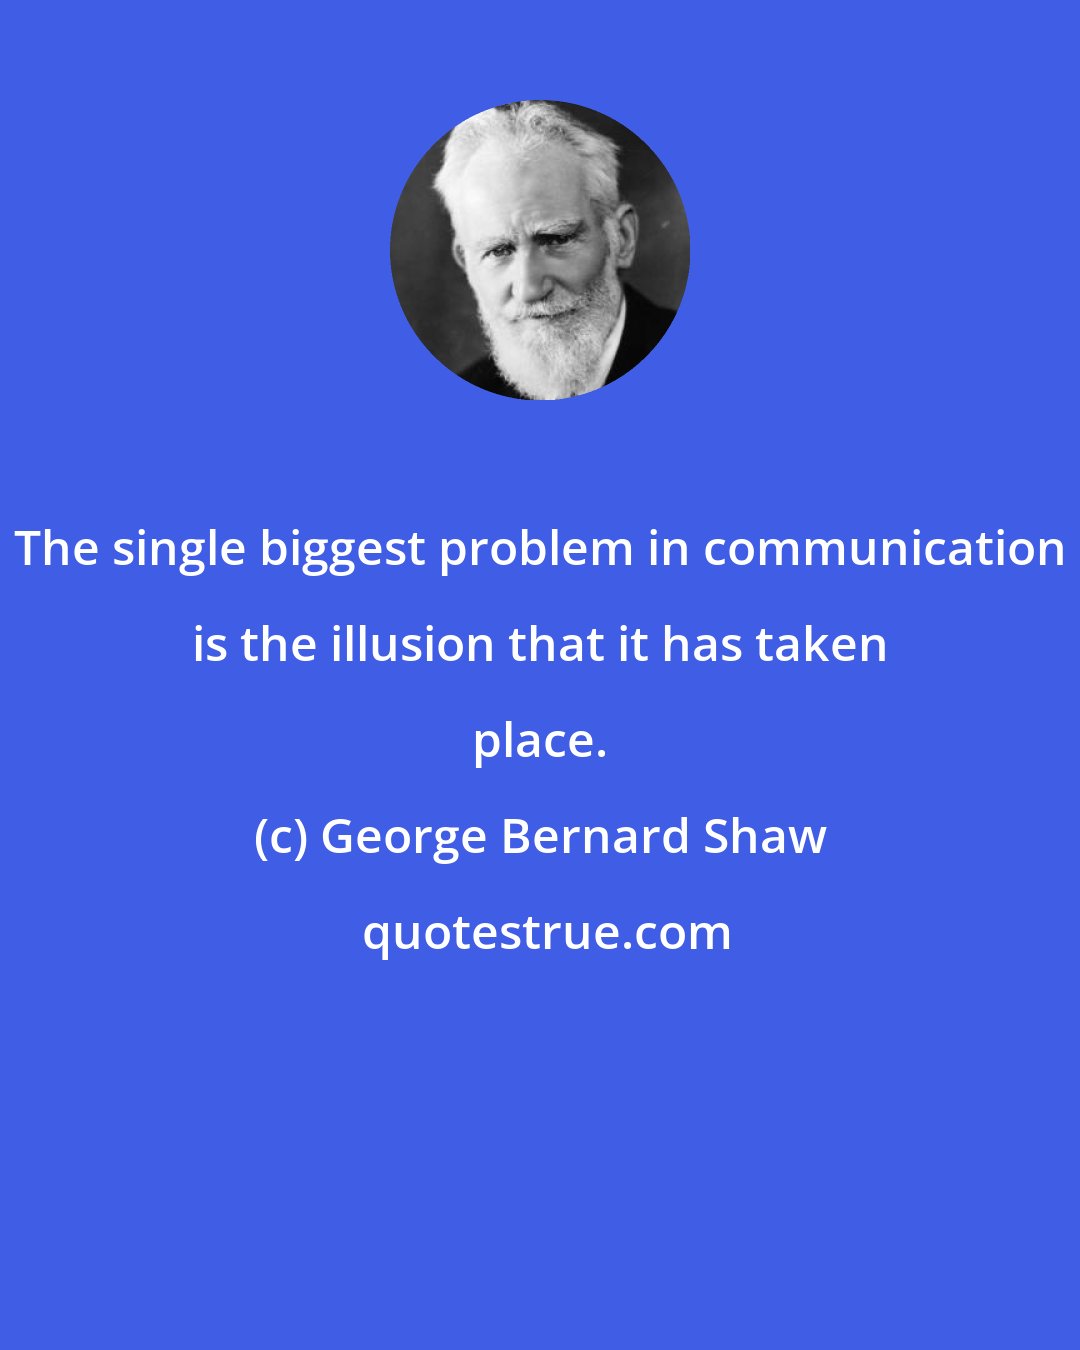 George Bernard Shaw: The single biggest problem in communication is the illusion that it has taken place.